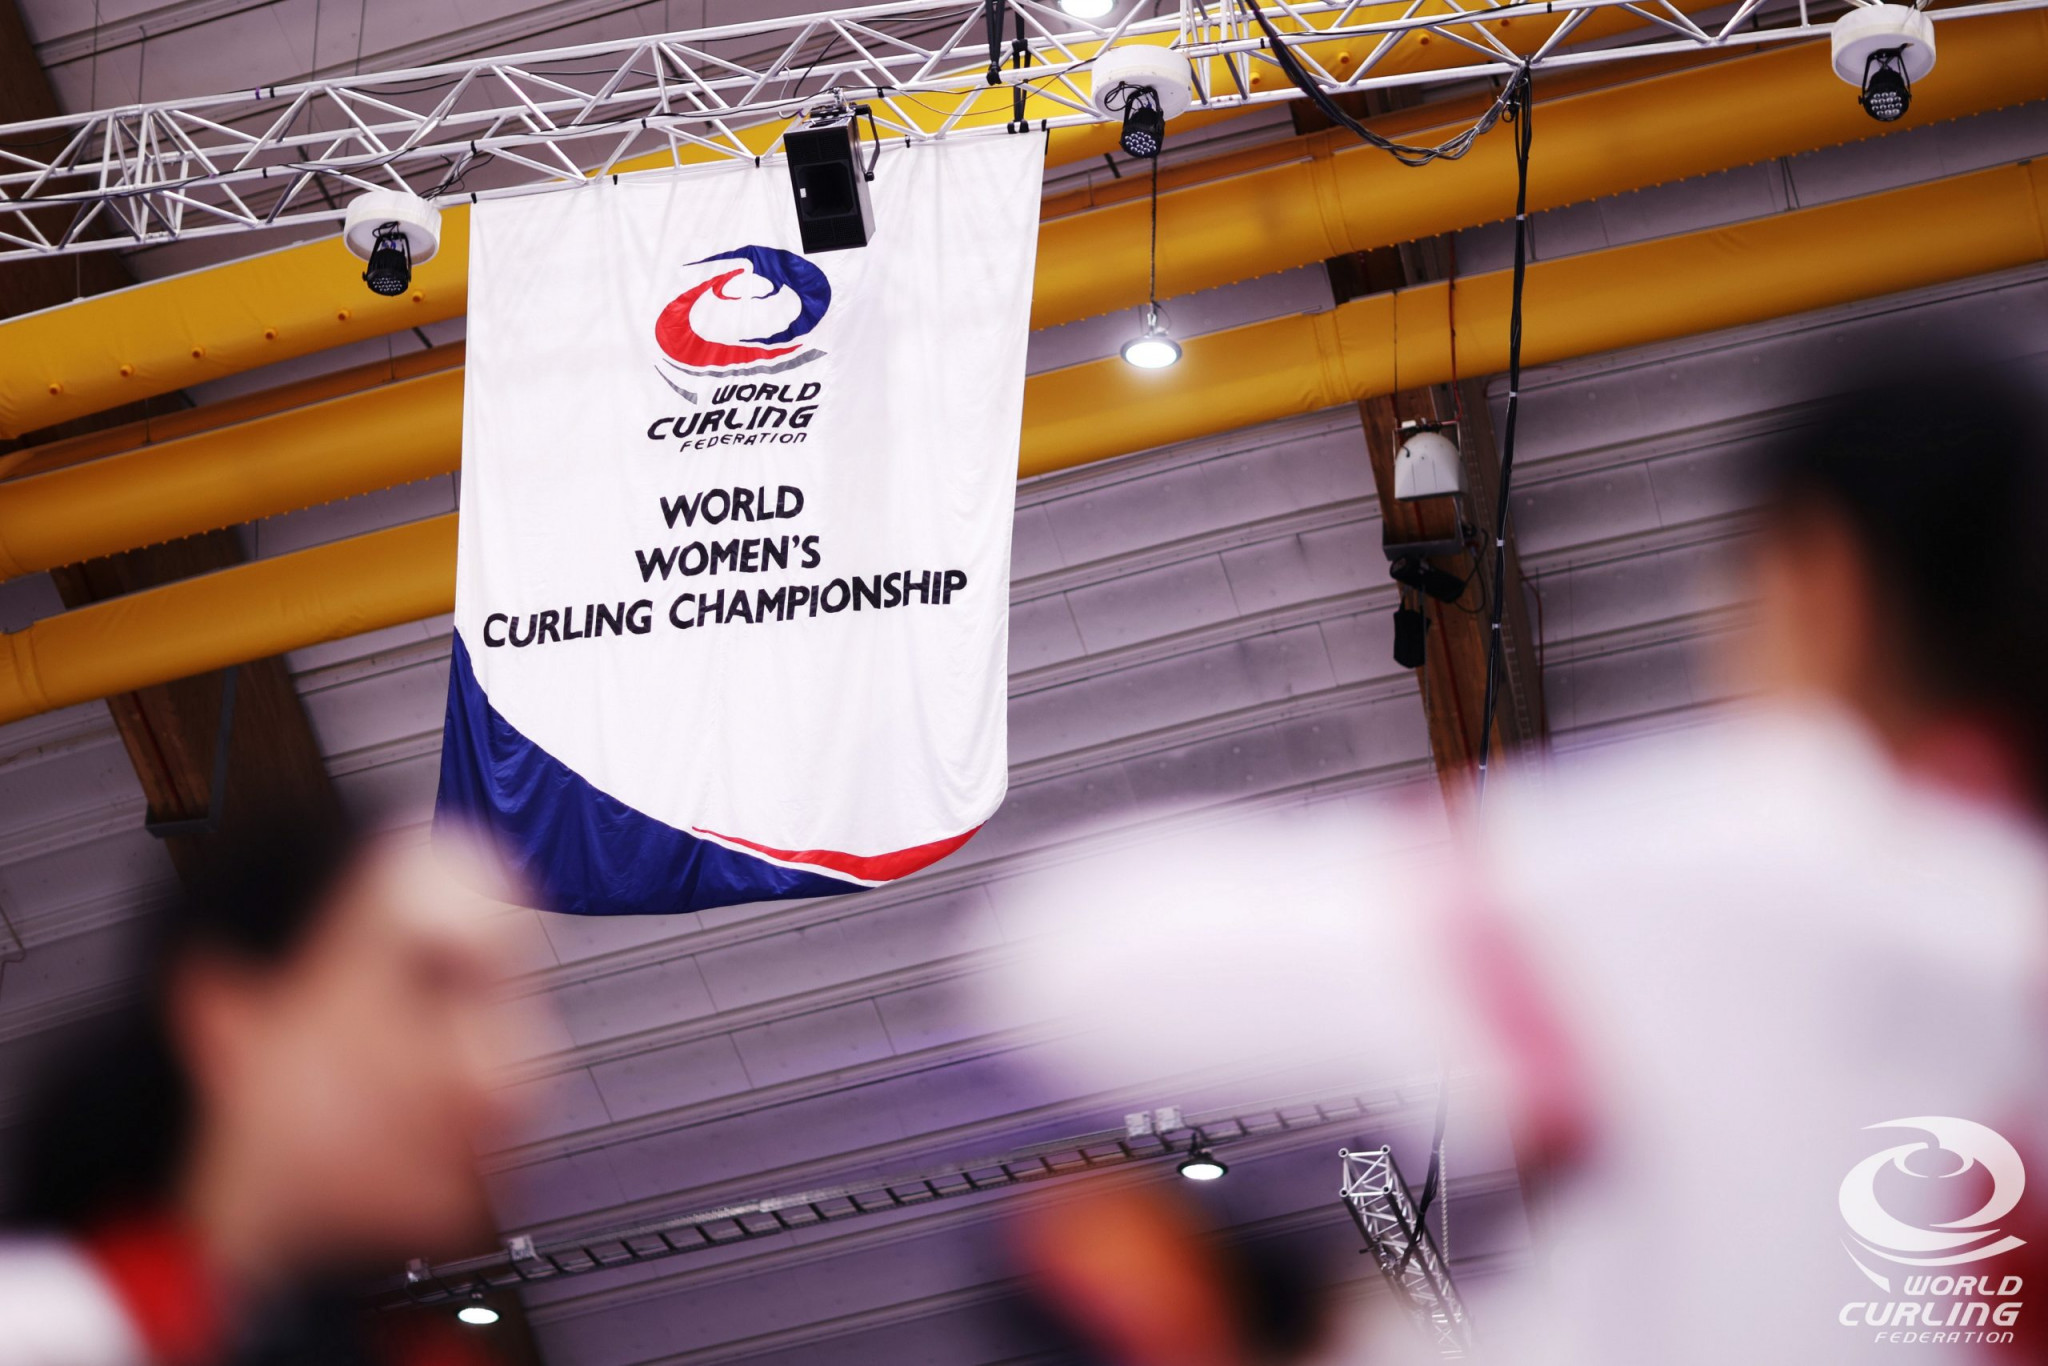 Switzerland have confirmed their place in the World Women's Curling Championship semi-final ©World Curling